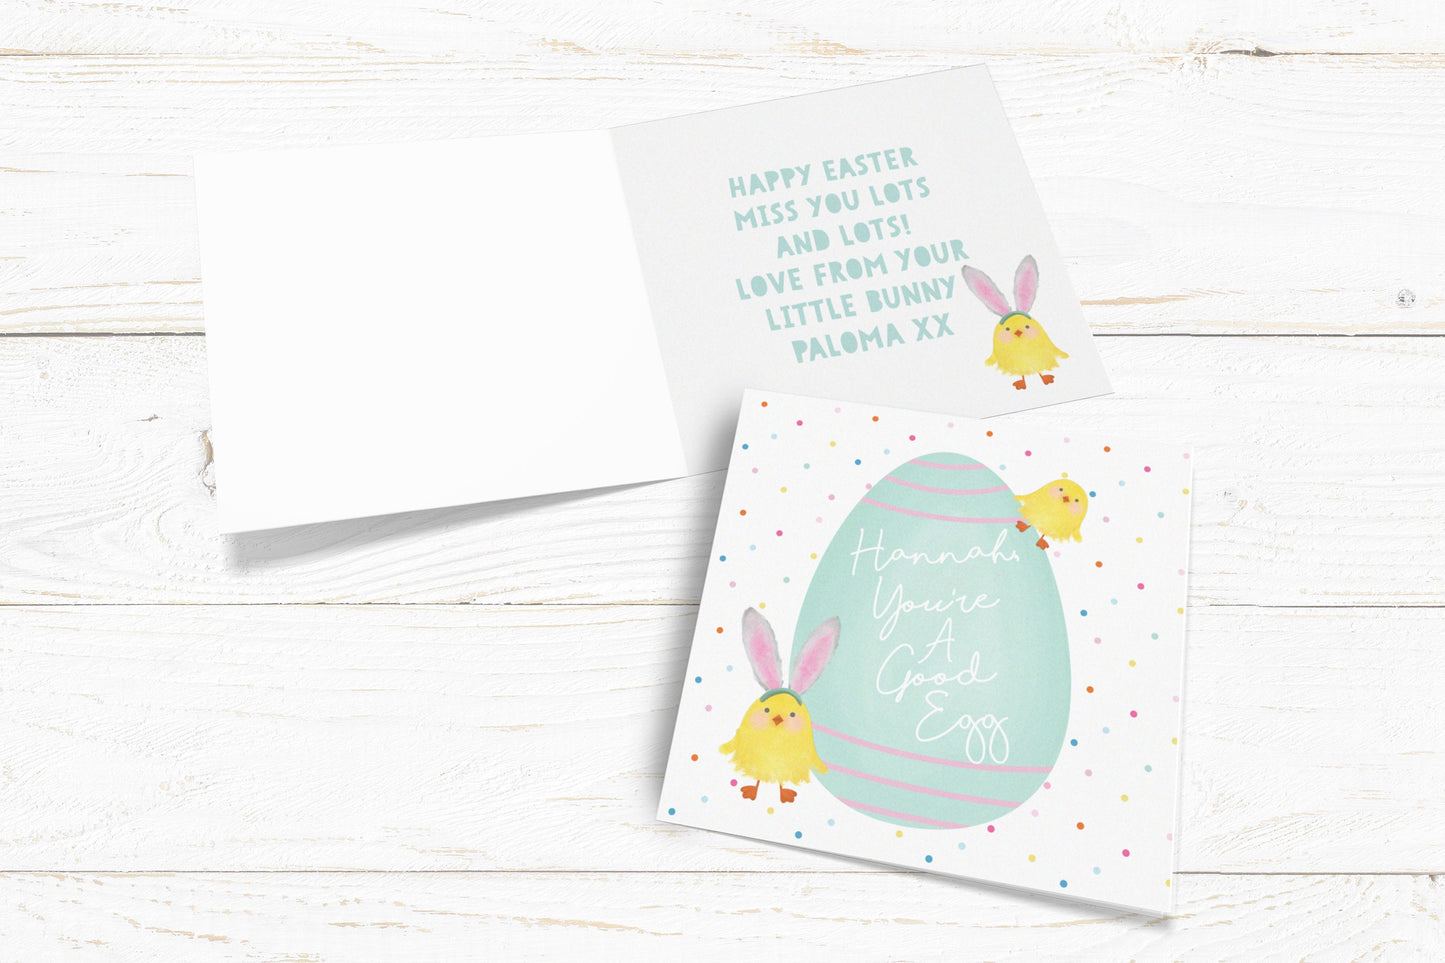 You're A Good Egg Personalised Card. Happy Easter Card. Personalised Easter Egg Card. Cute Chick Card. Send Direct Option.